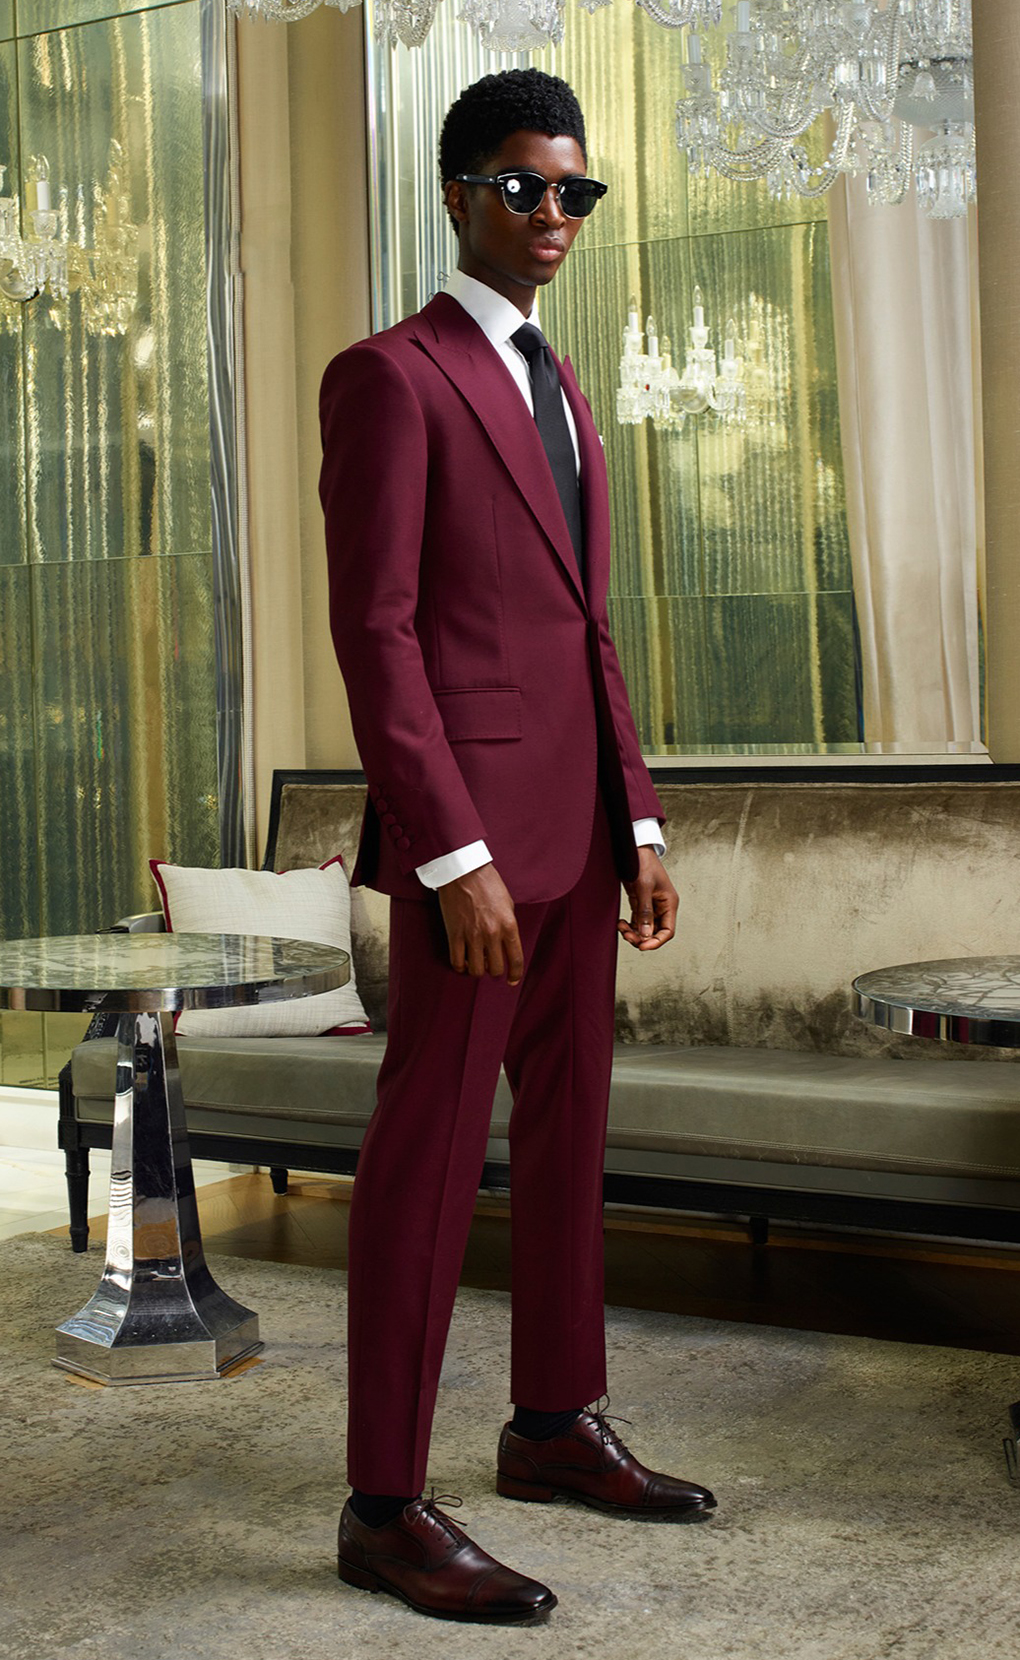 Burgundy suit, white shirt, and black solid tie